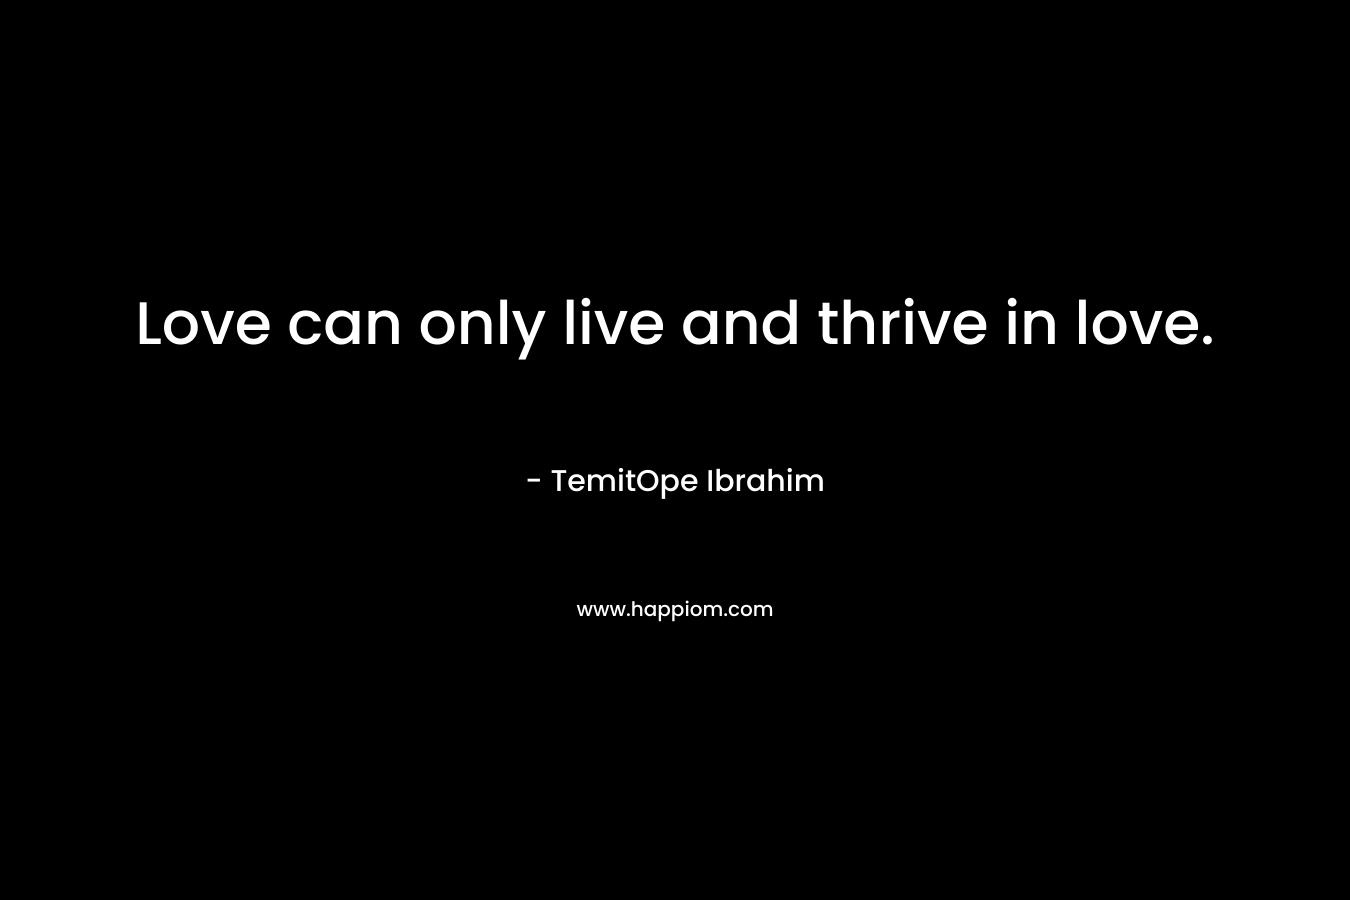 Love can only live and thrive in love. – TemitOpe Ibrahim